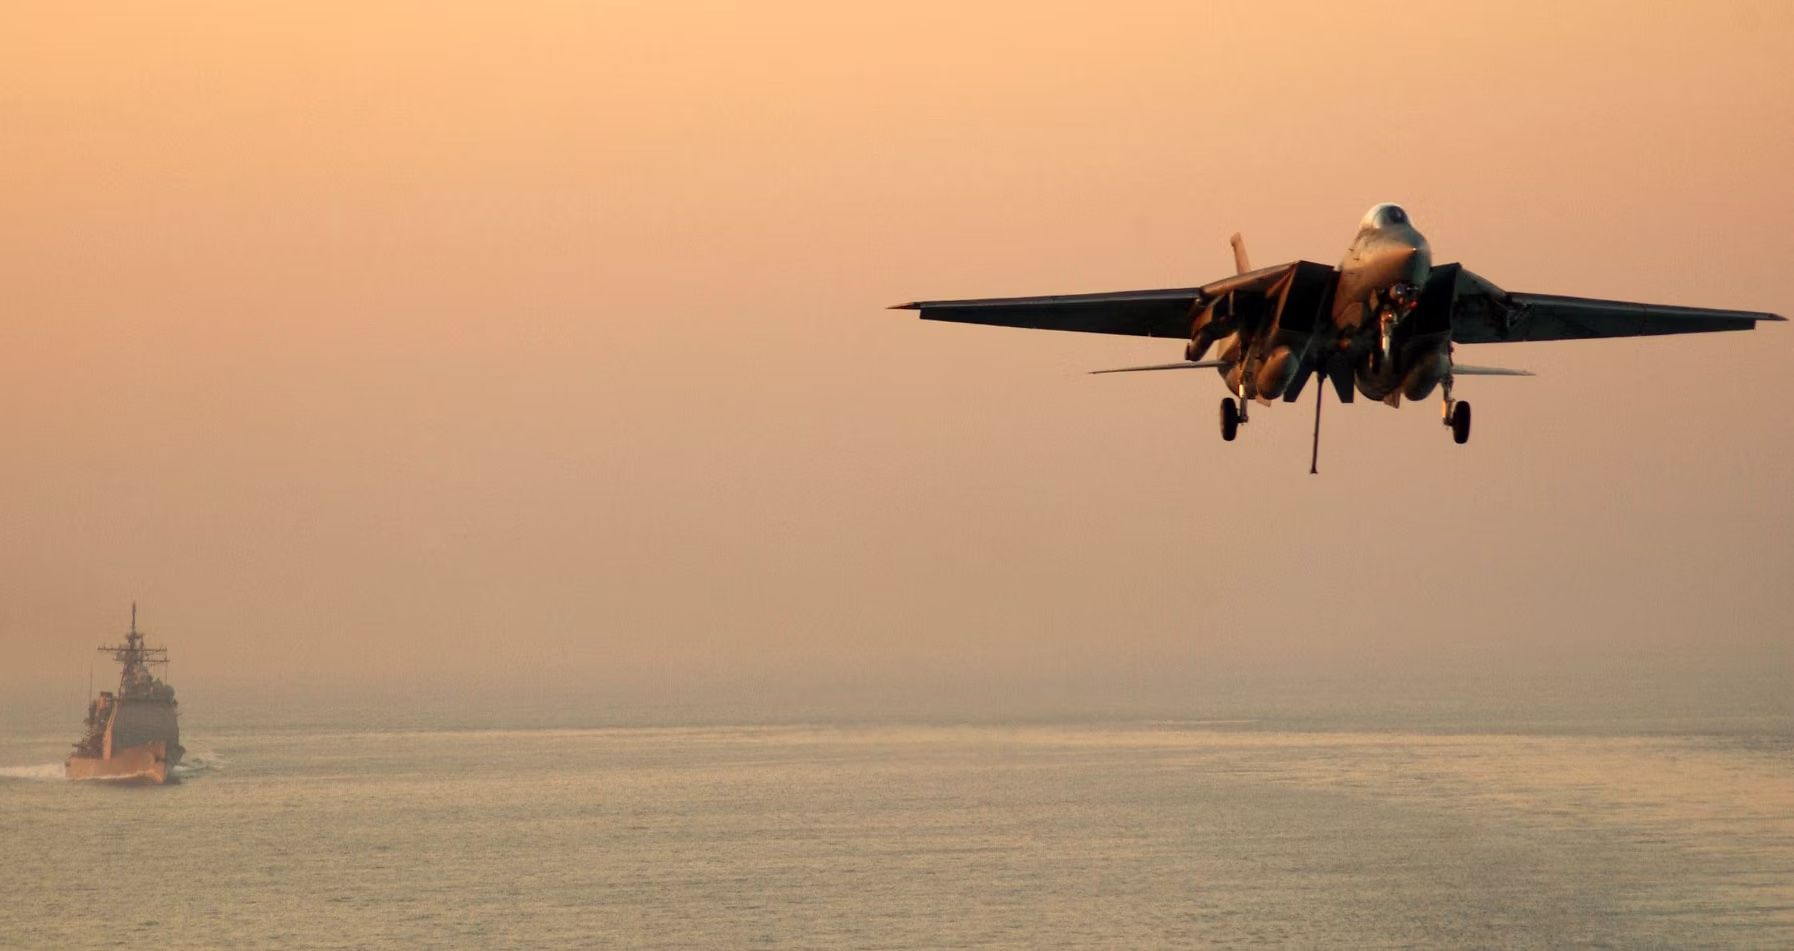 F-14 Tomcat coming to land